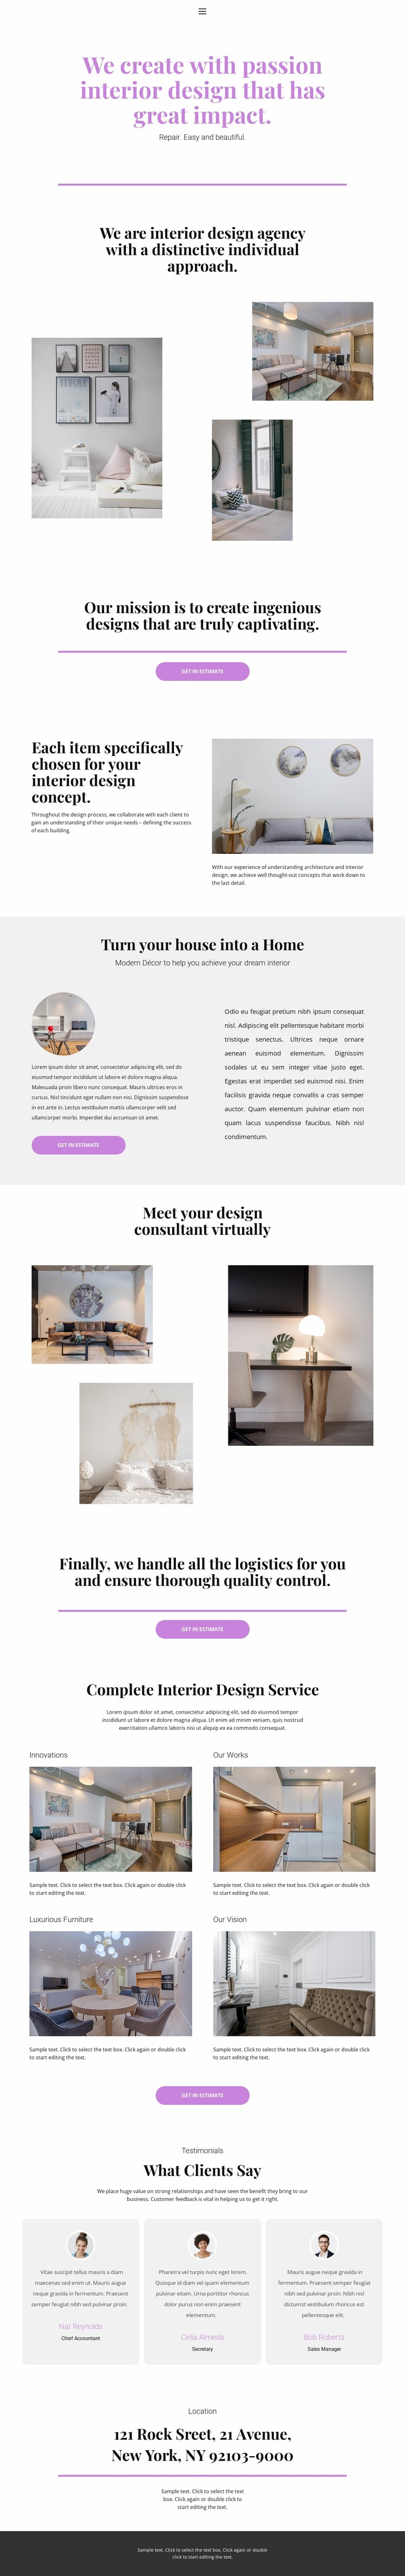 Choice of design for the house WordPress Website Builder